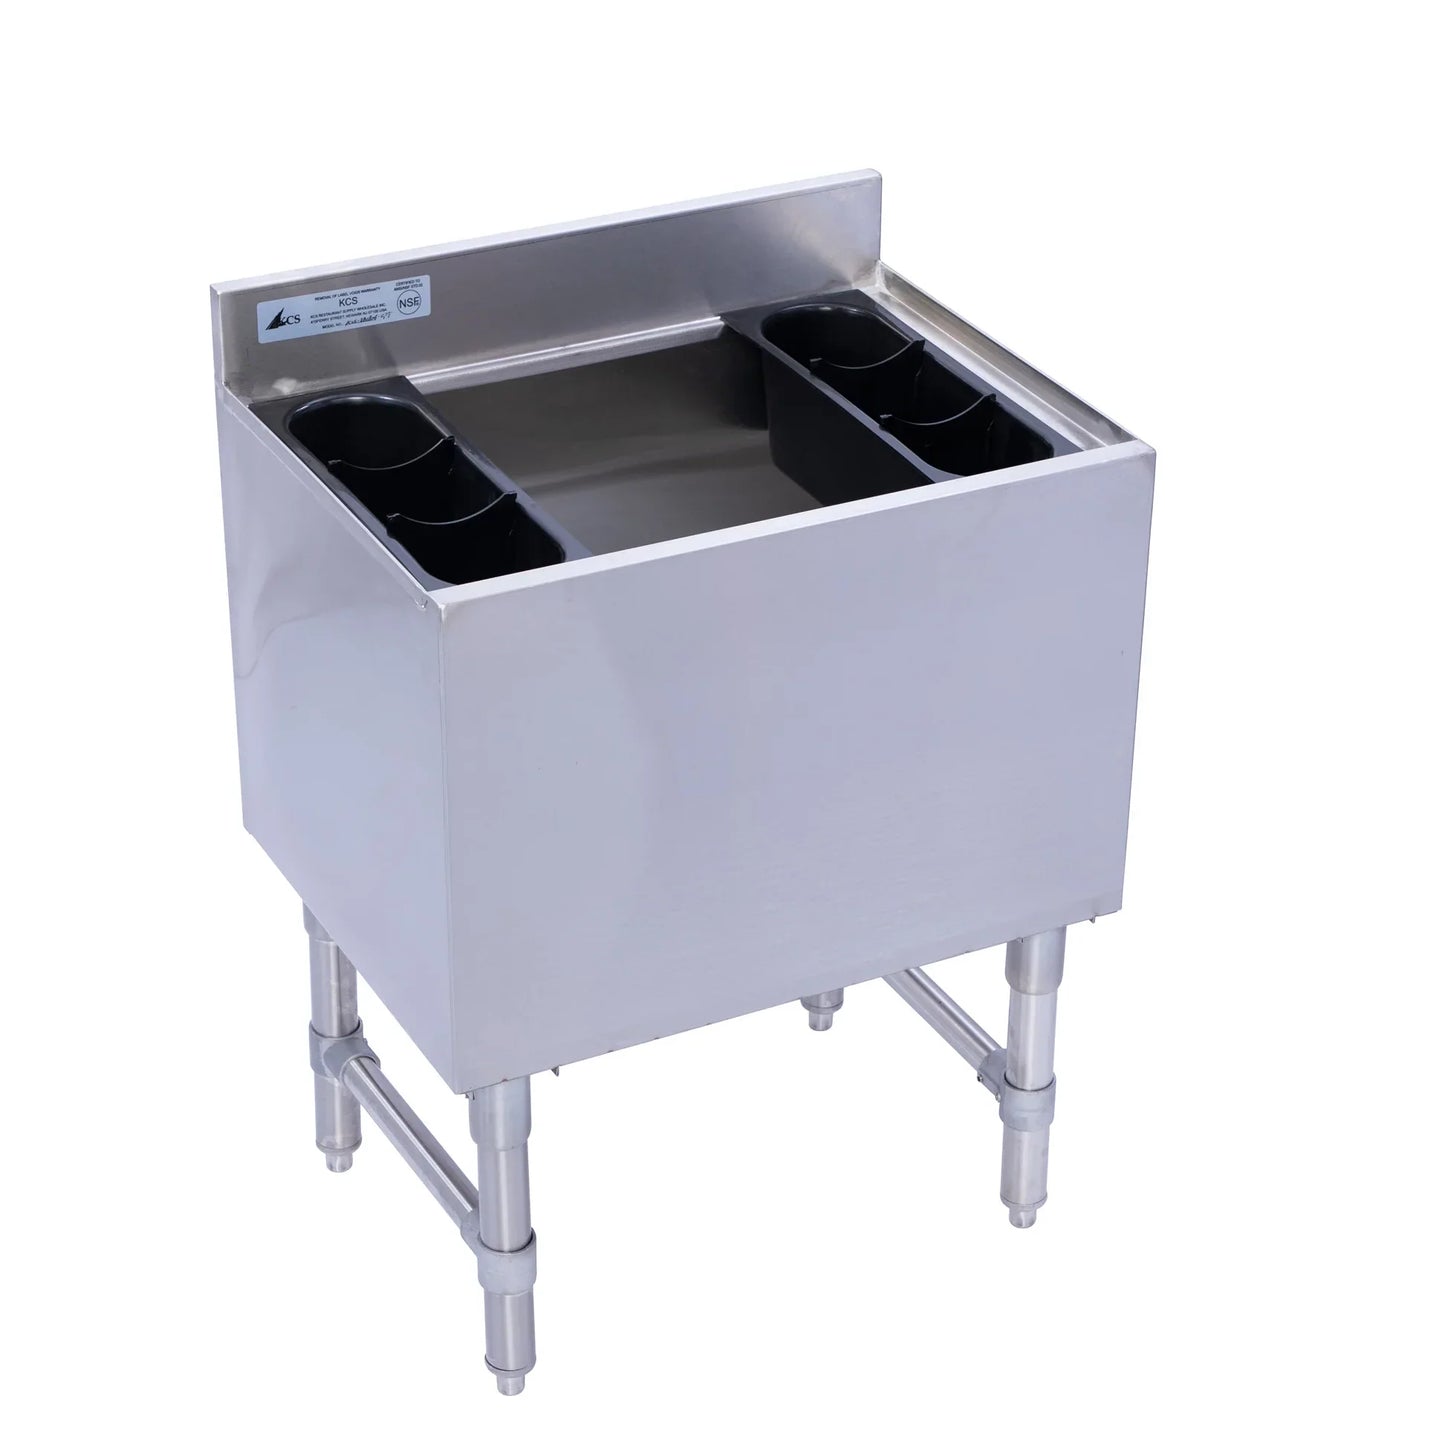 KCS IB1830DP-CPT 30" Wide Stainless Steel Insulated 15" Deep Underbar Ice Bin with 7-Circuit Cold Plate